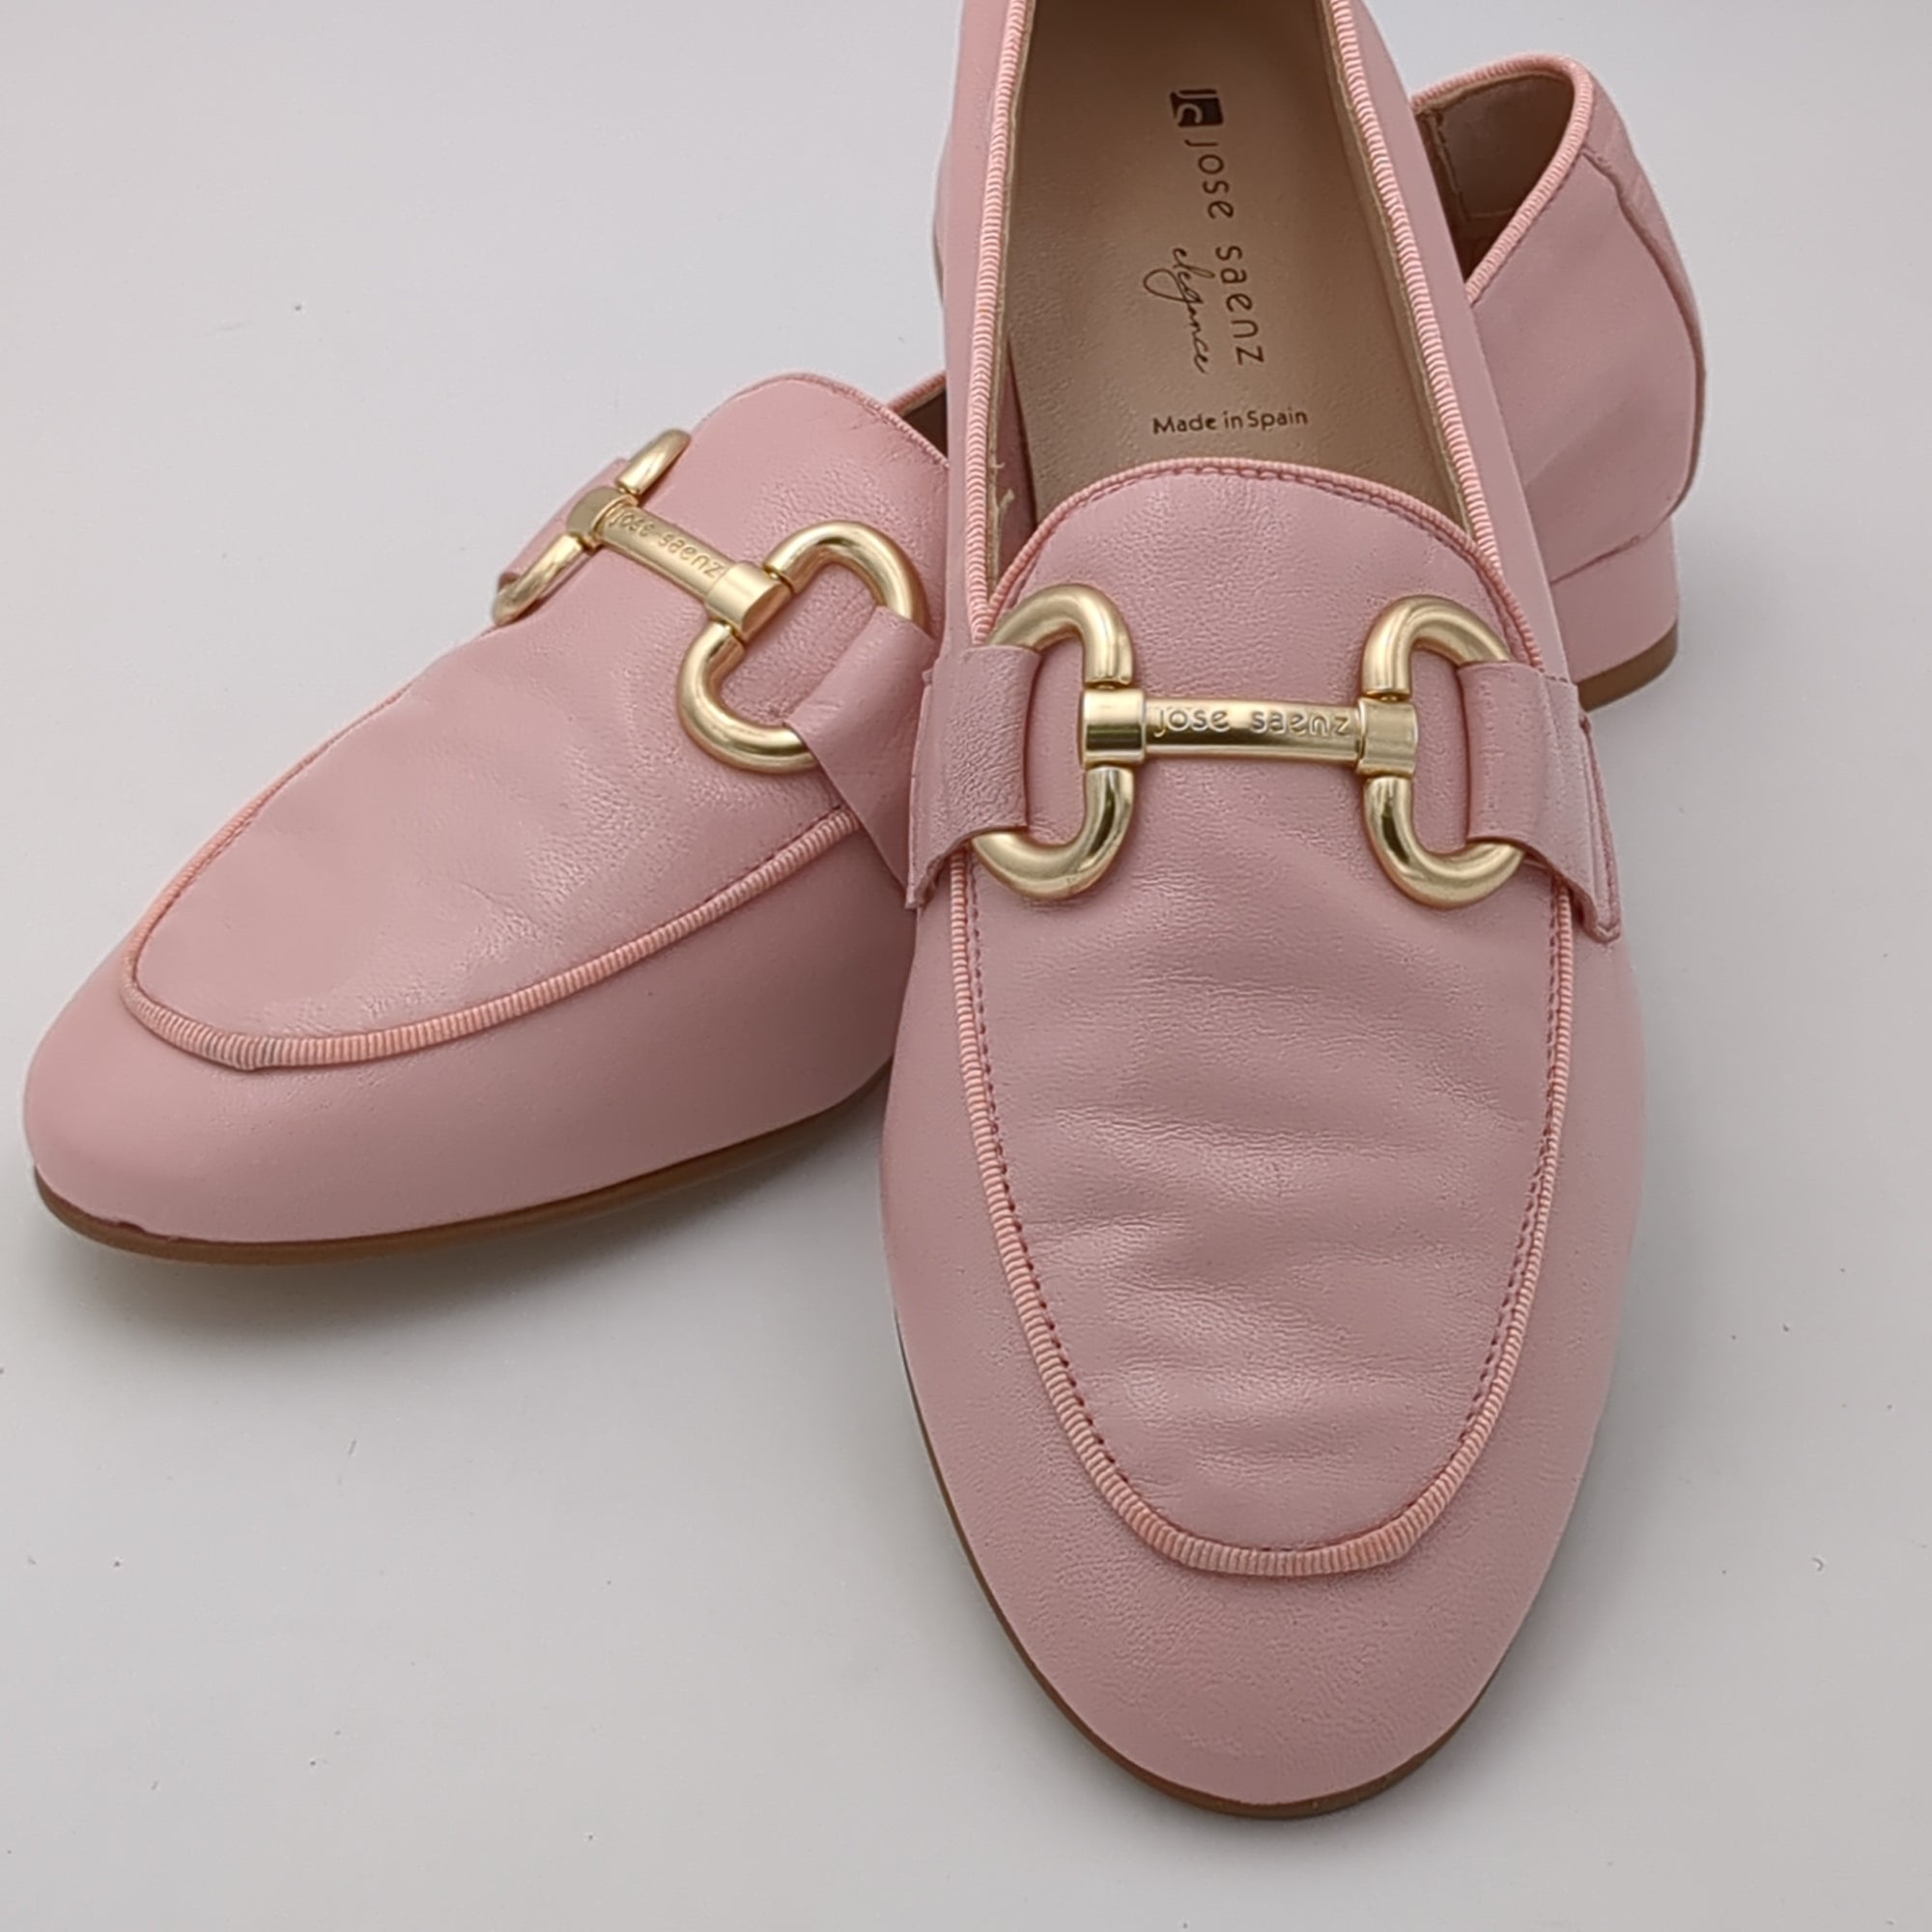 Jose Saenz Light Pink Loafers with Gold Chain Detail for Women